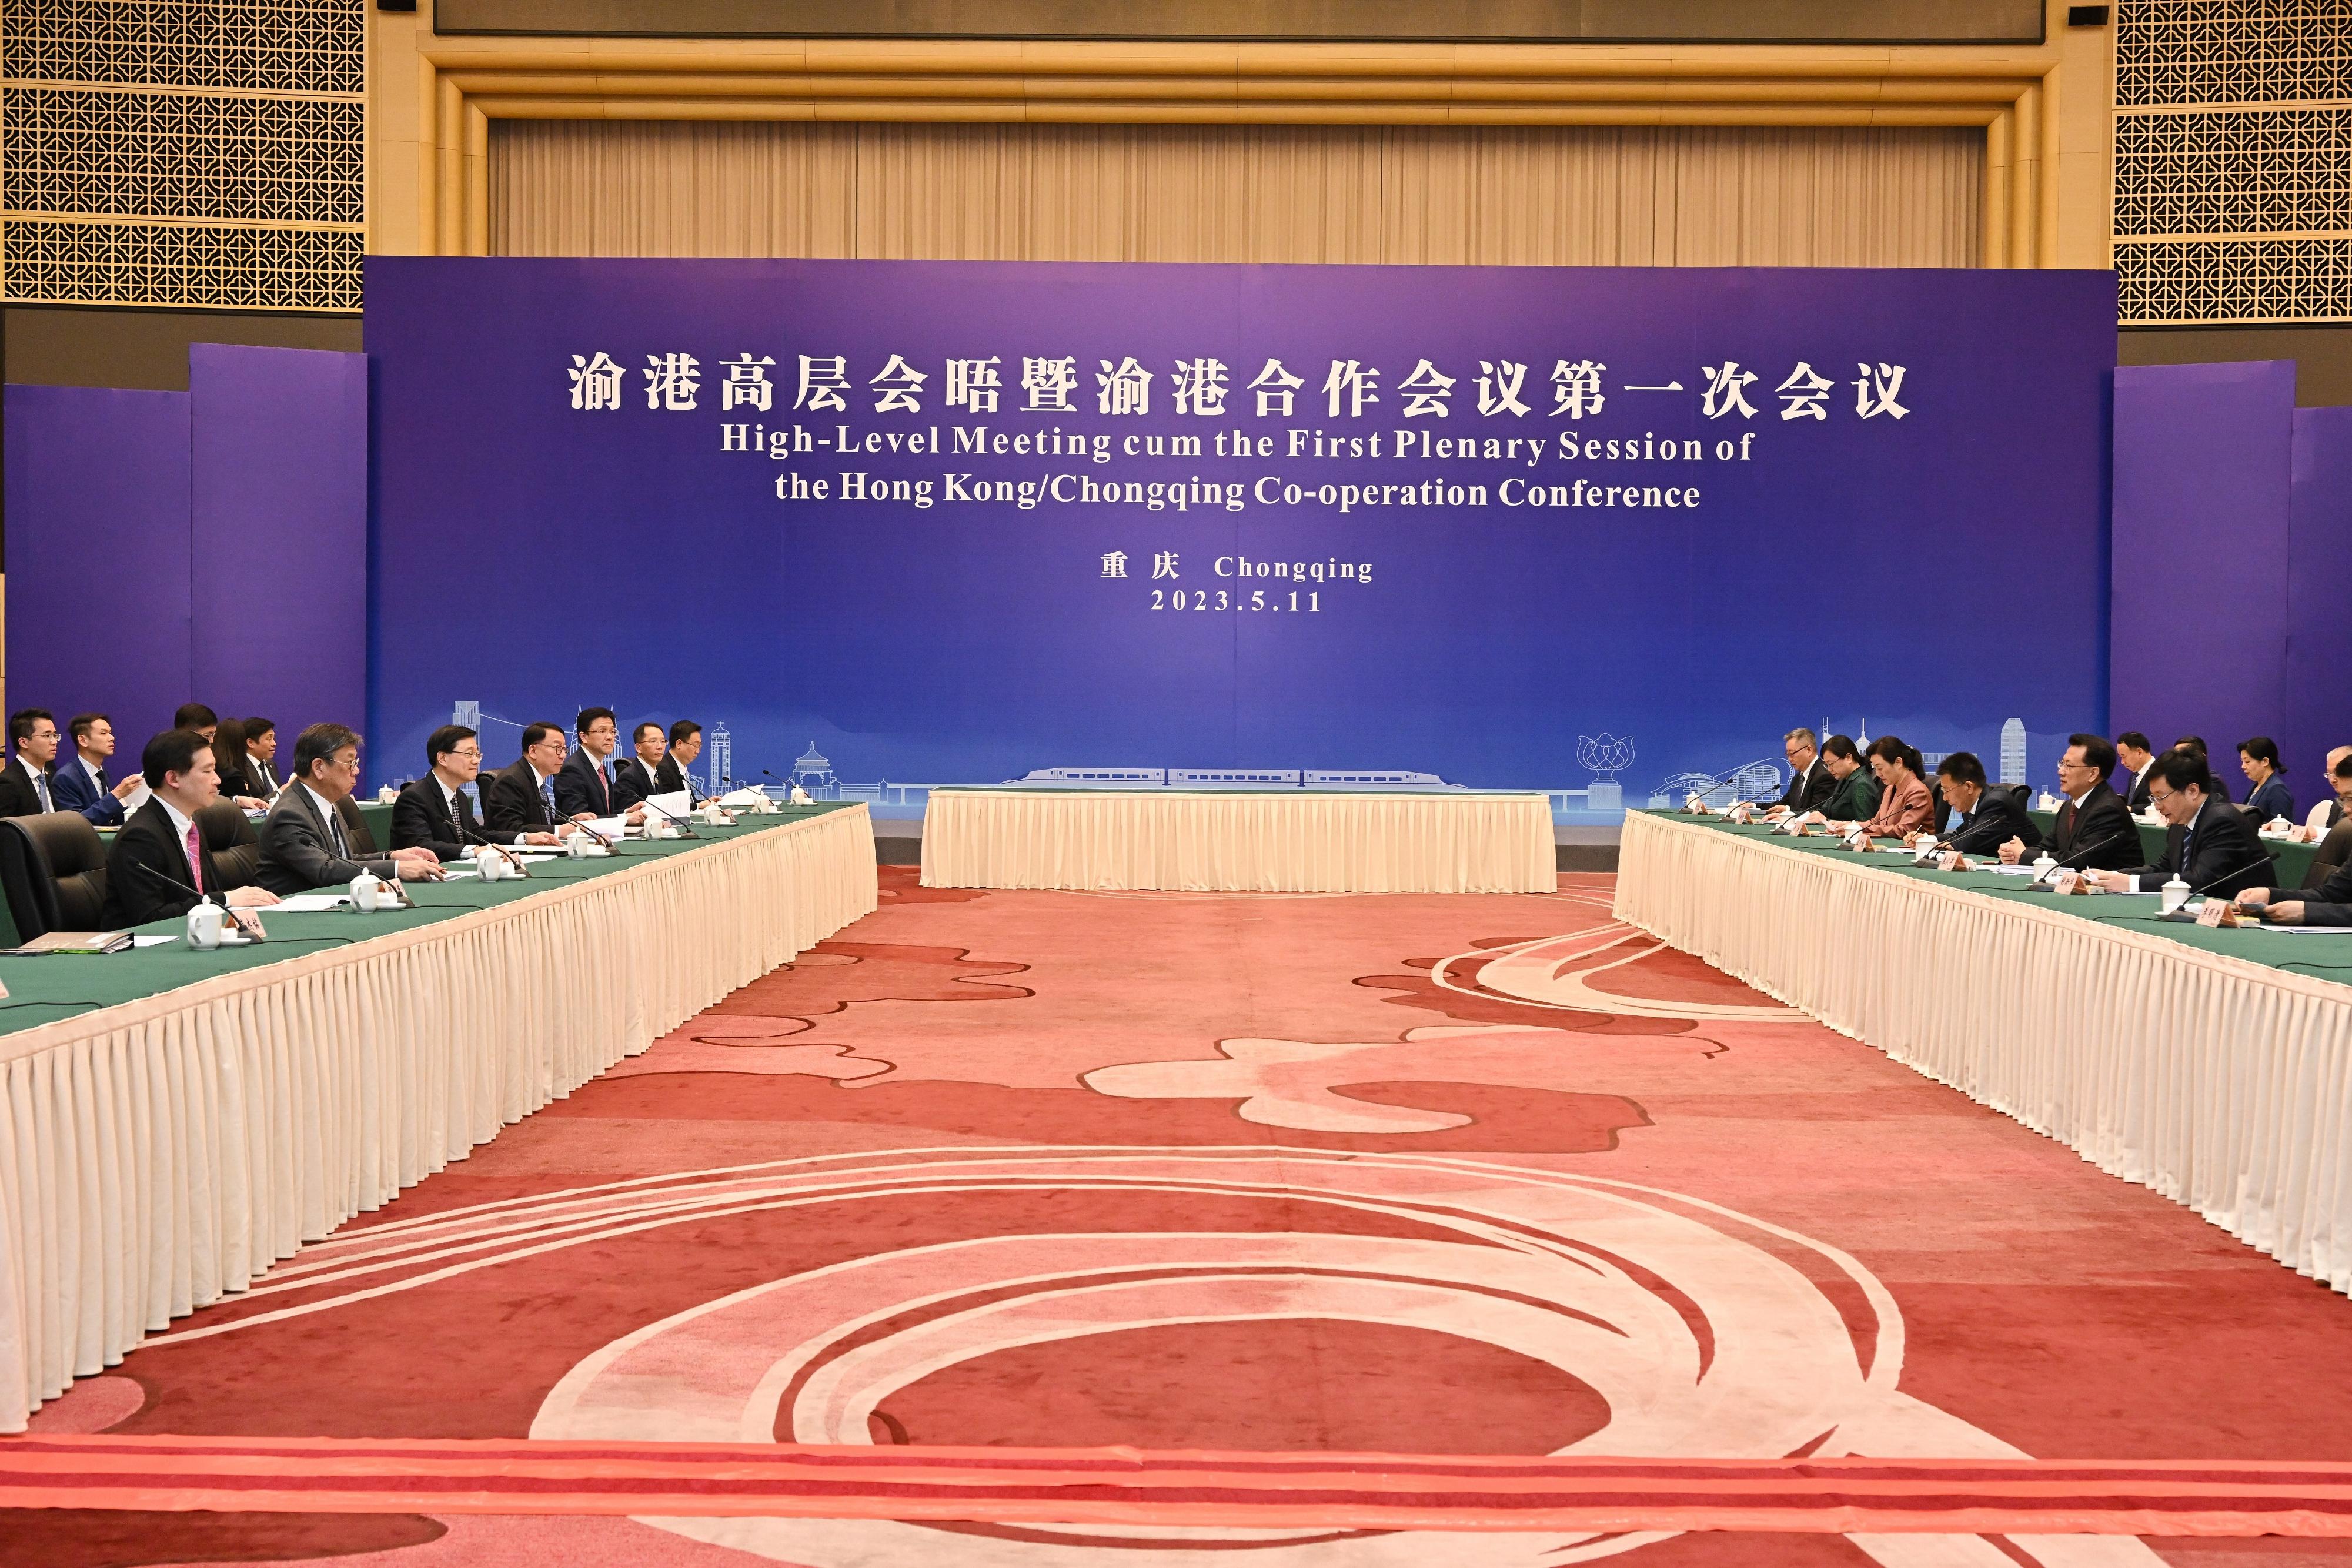 The Chief Executive, Mr John Lee (third left), attends the High-Level Meeting cum First Plenary Session of the Hong Kong/Chongqing Co-operation Conference in Chongqing today (May 11). Also attending the meeting are the Chief Secretary for Administration, Mr Chan Kwok-ki (fourth left); the Secretary for Commerce and Economic Development, Mr Algernon Yau (second left); the Secretary for Innovation, Technology and Industry, Professor Sun Dong (fifth left); and the Under Secretary for Constitutional and Mainland Affairs, Mr Clement Woo (first left).